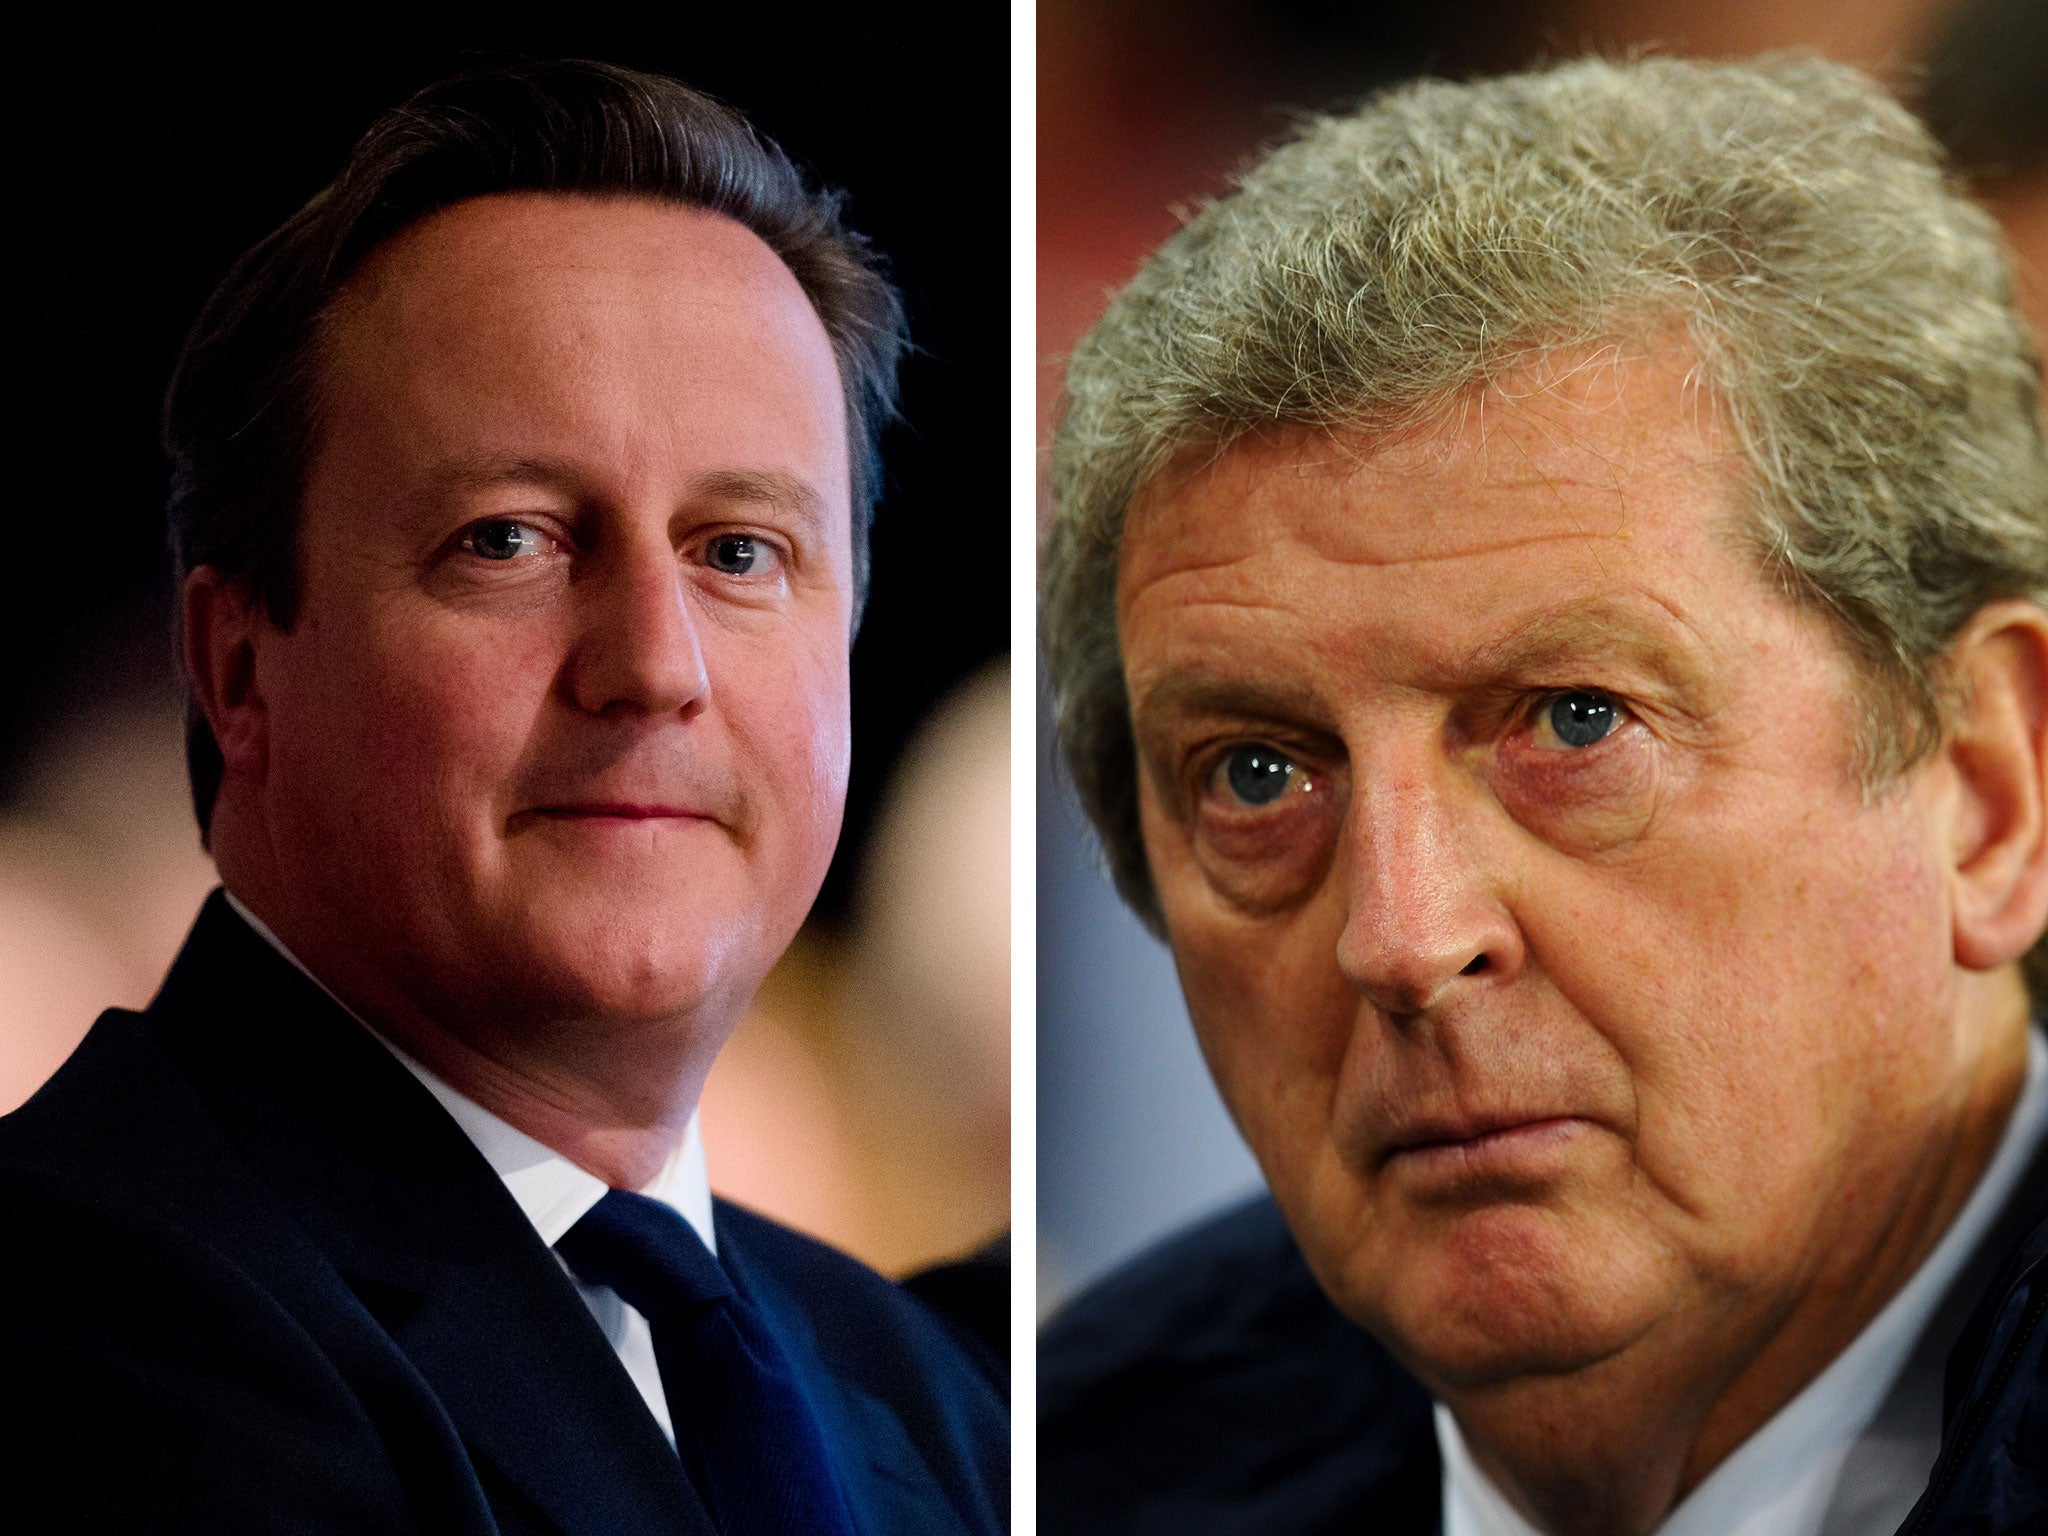 David Cameron praised Roy Hodgson's England side for qualifying for next year's World Cup in Brazil